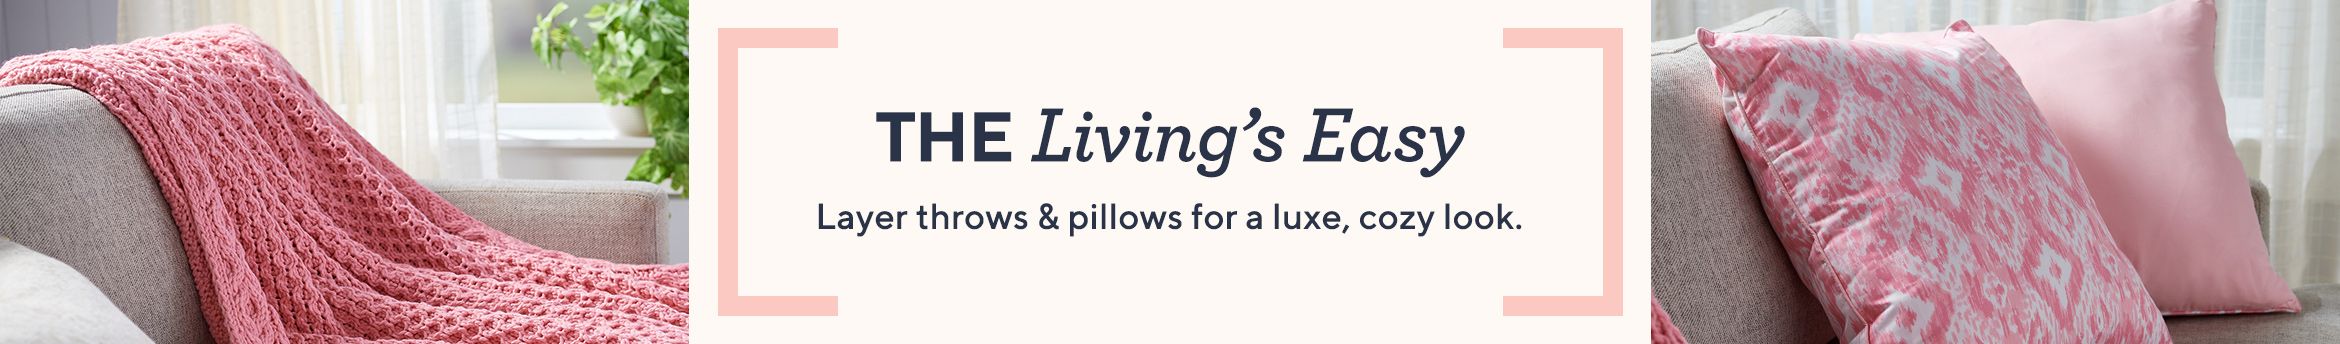 The Living's Easy. Layer throws & pillows for a luxe, cozy look.